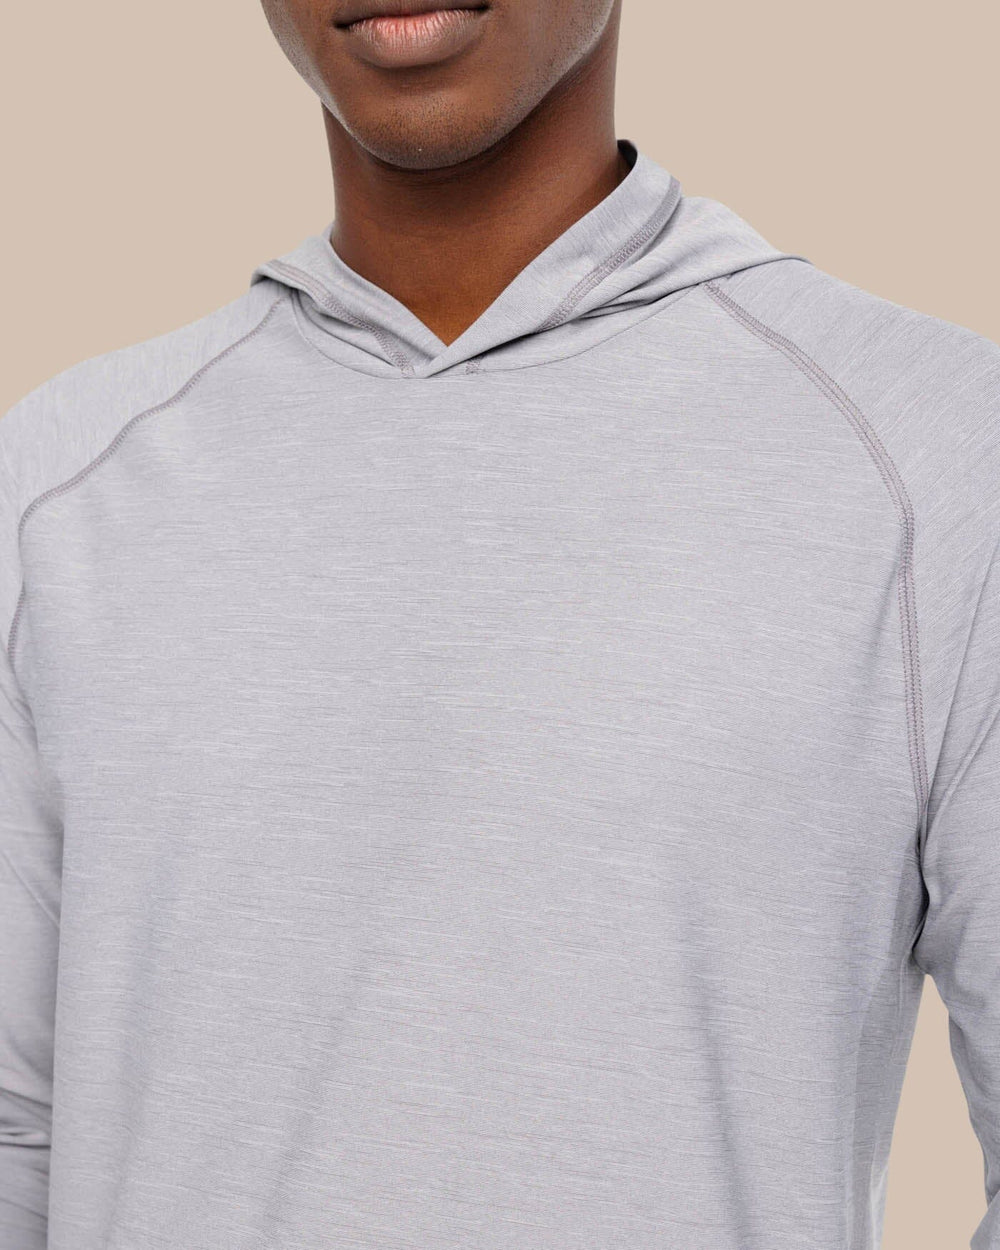 The detail view of the Southern Tide brrr°®-illiant Performance Hoodie by Southern Tide - Steel Grey